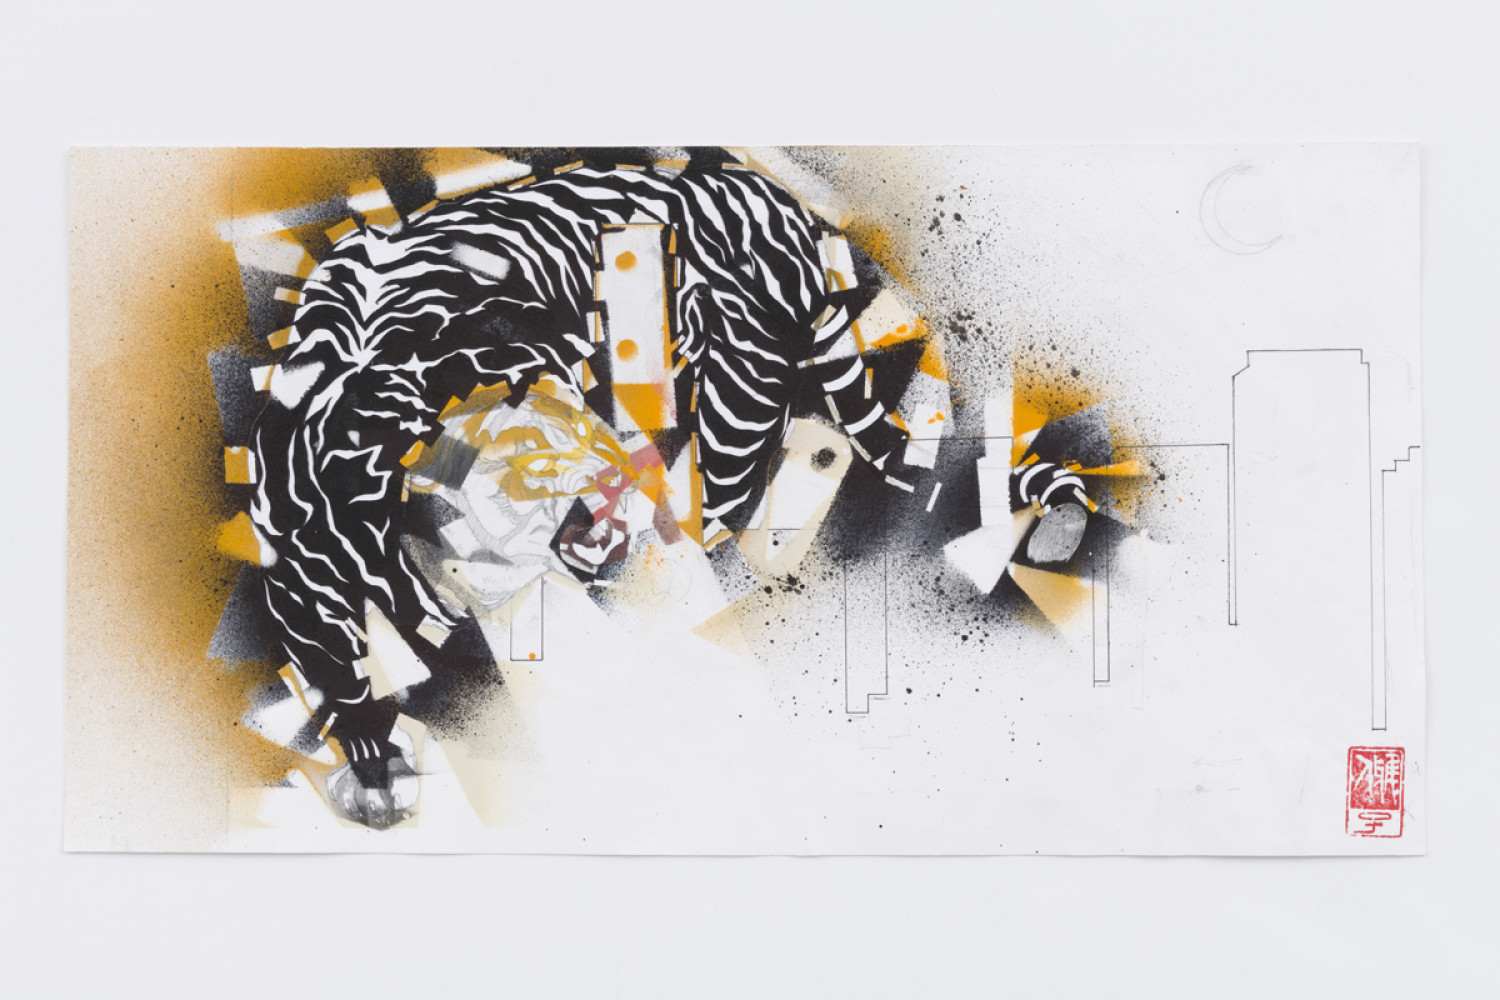 Gajin Fujita, ‘Study for “Midnite Alley Cat“ (Cat)’, 2019, Pencil and spray paint on paper